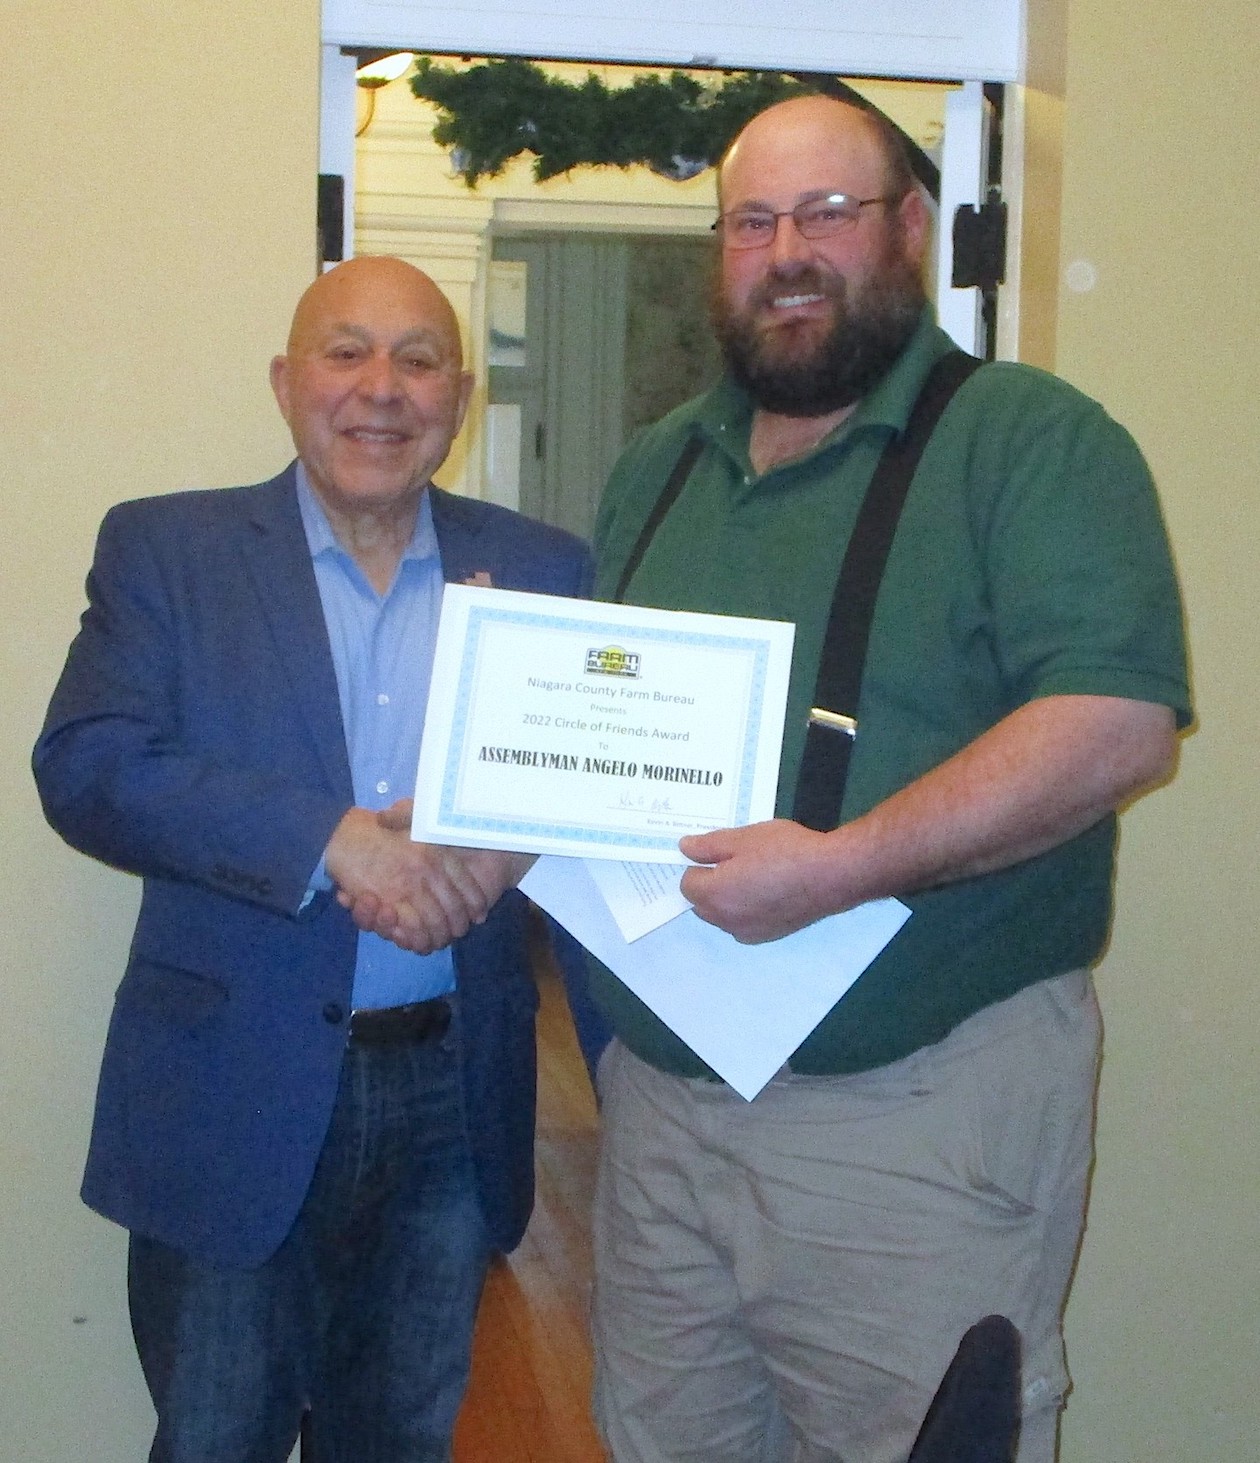 Assemblyman Angelo Morinello accepts his award from Niagara County President Farm Bureau Kevin Bittner. (Submitted photo)